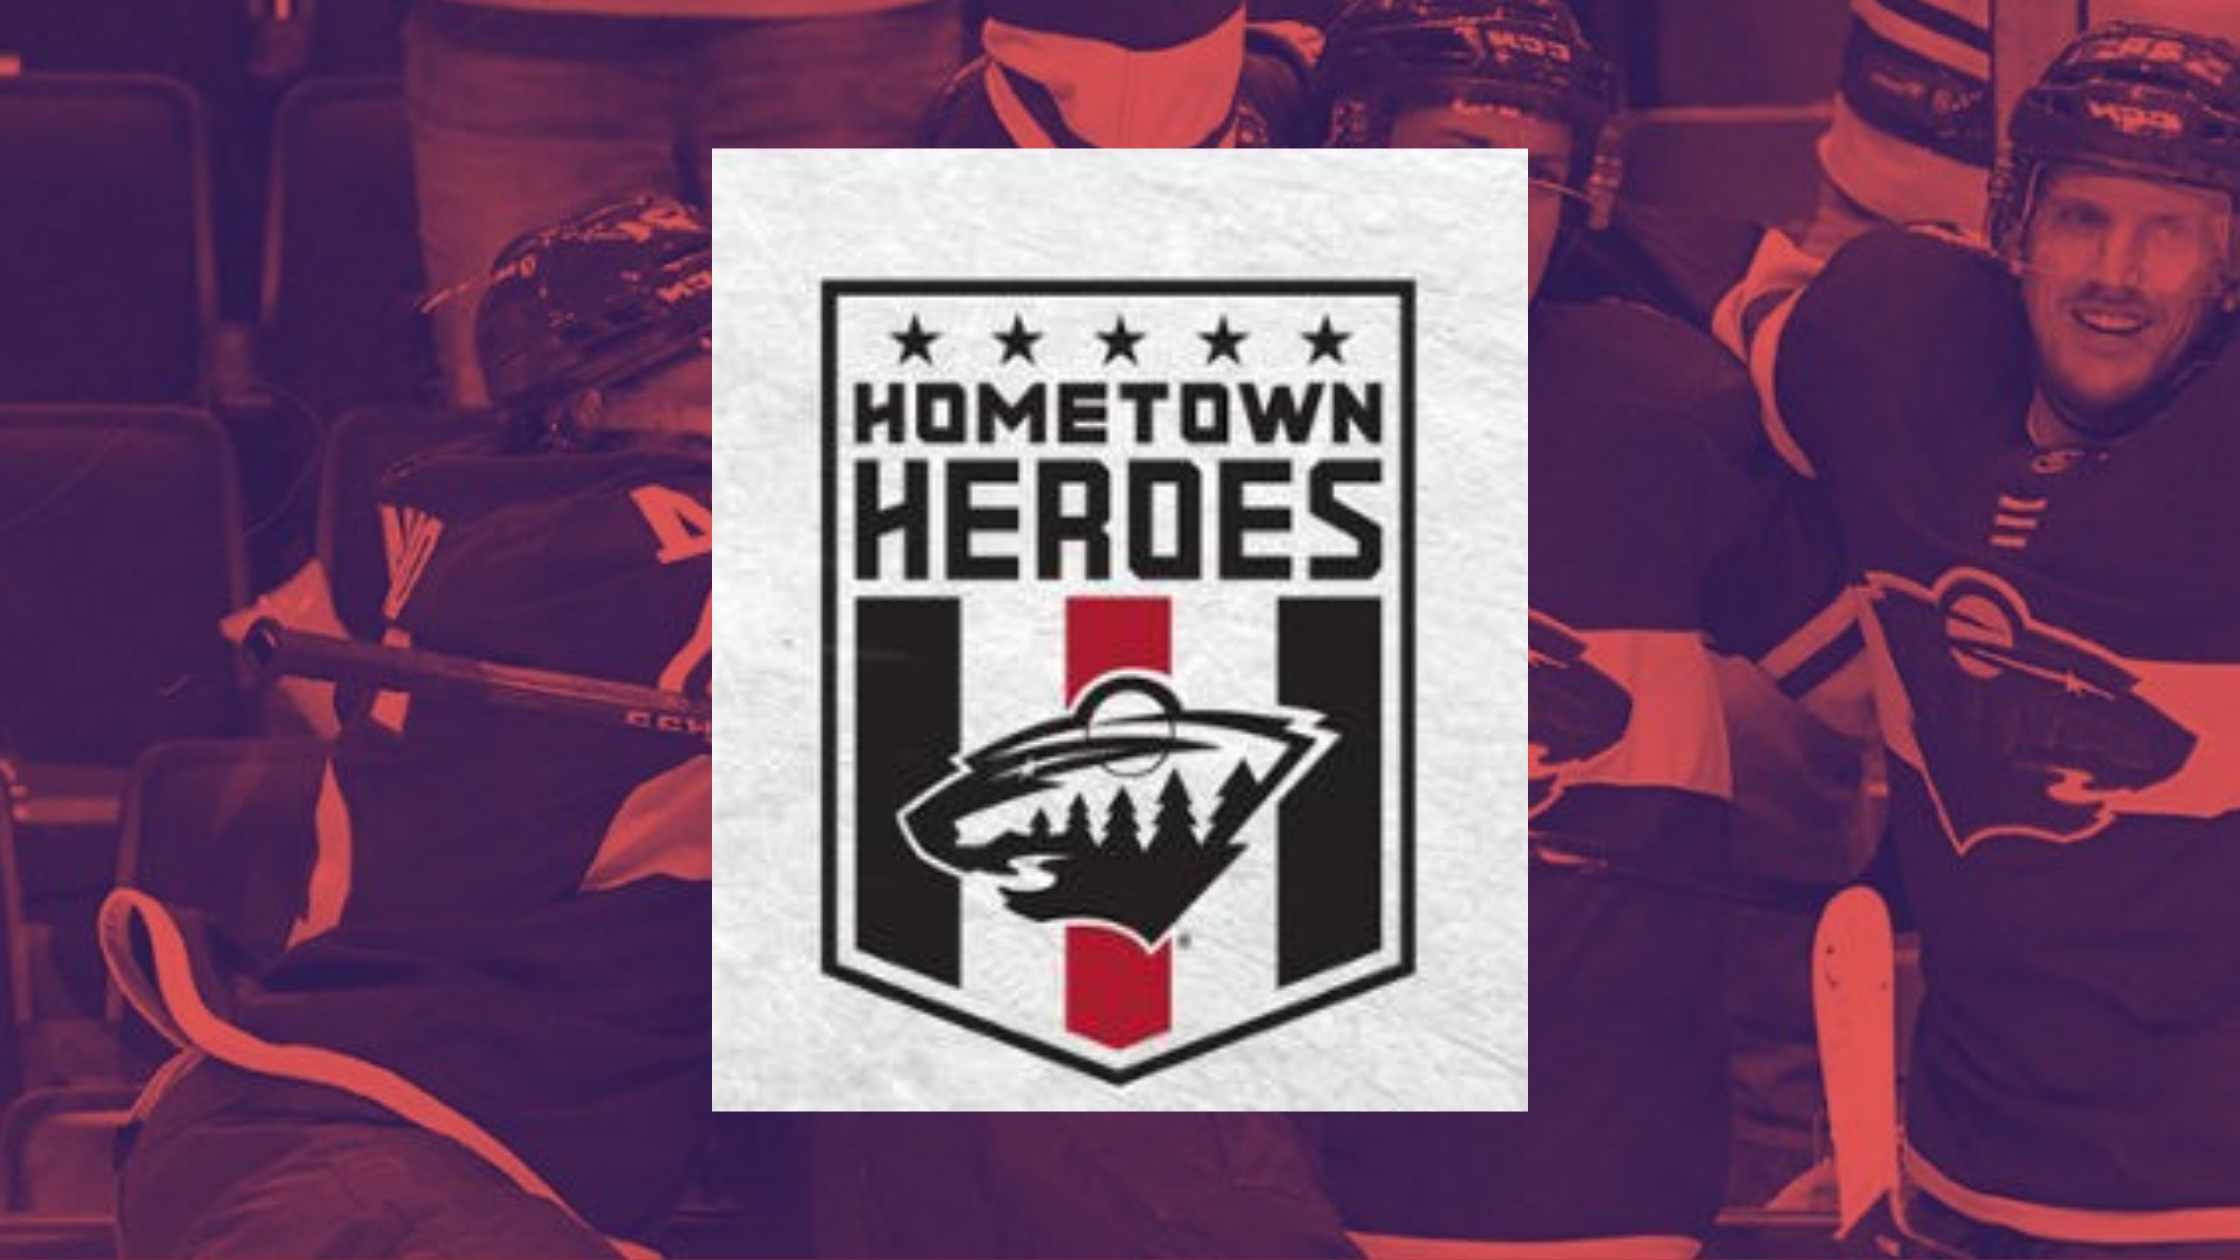 See You at the Hometown Heroes Firefighter Appreciation Night with